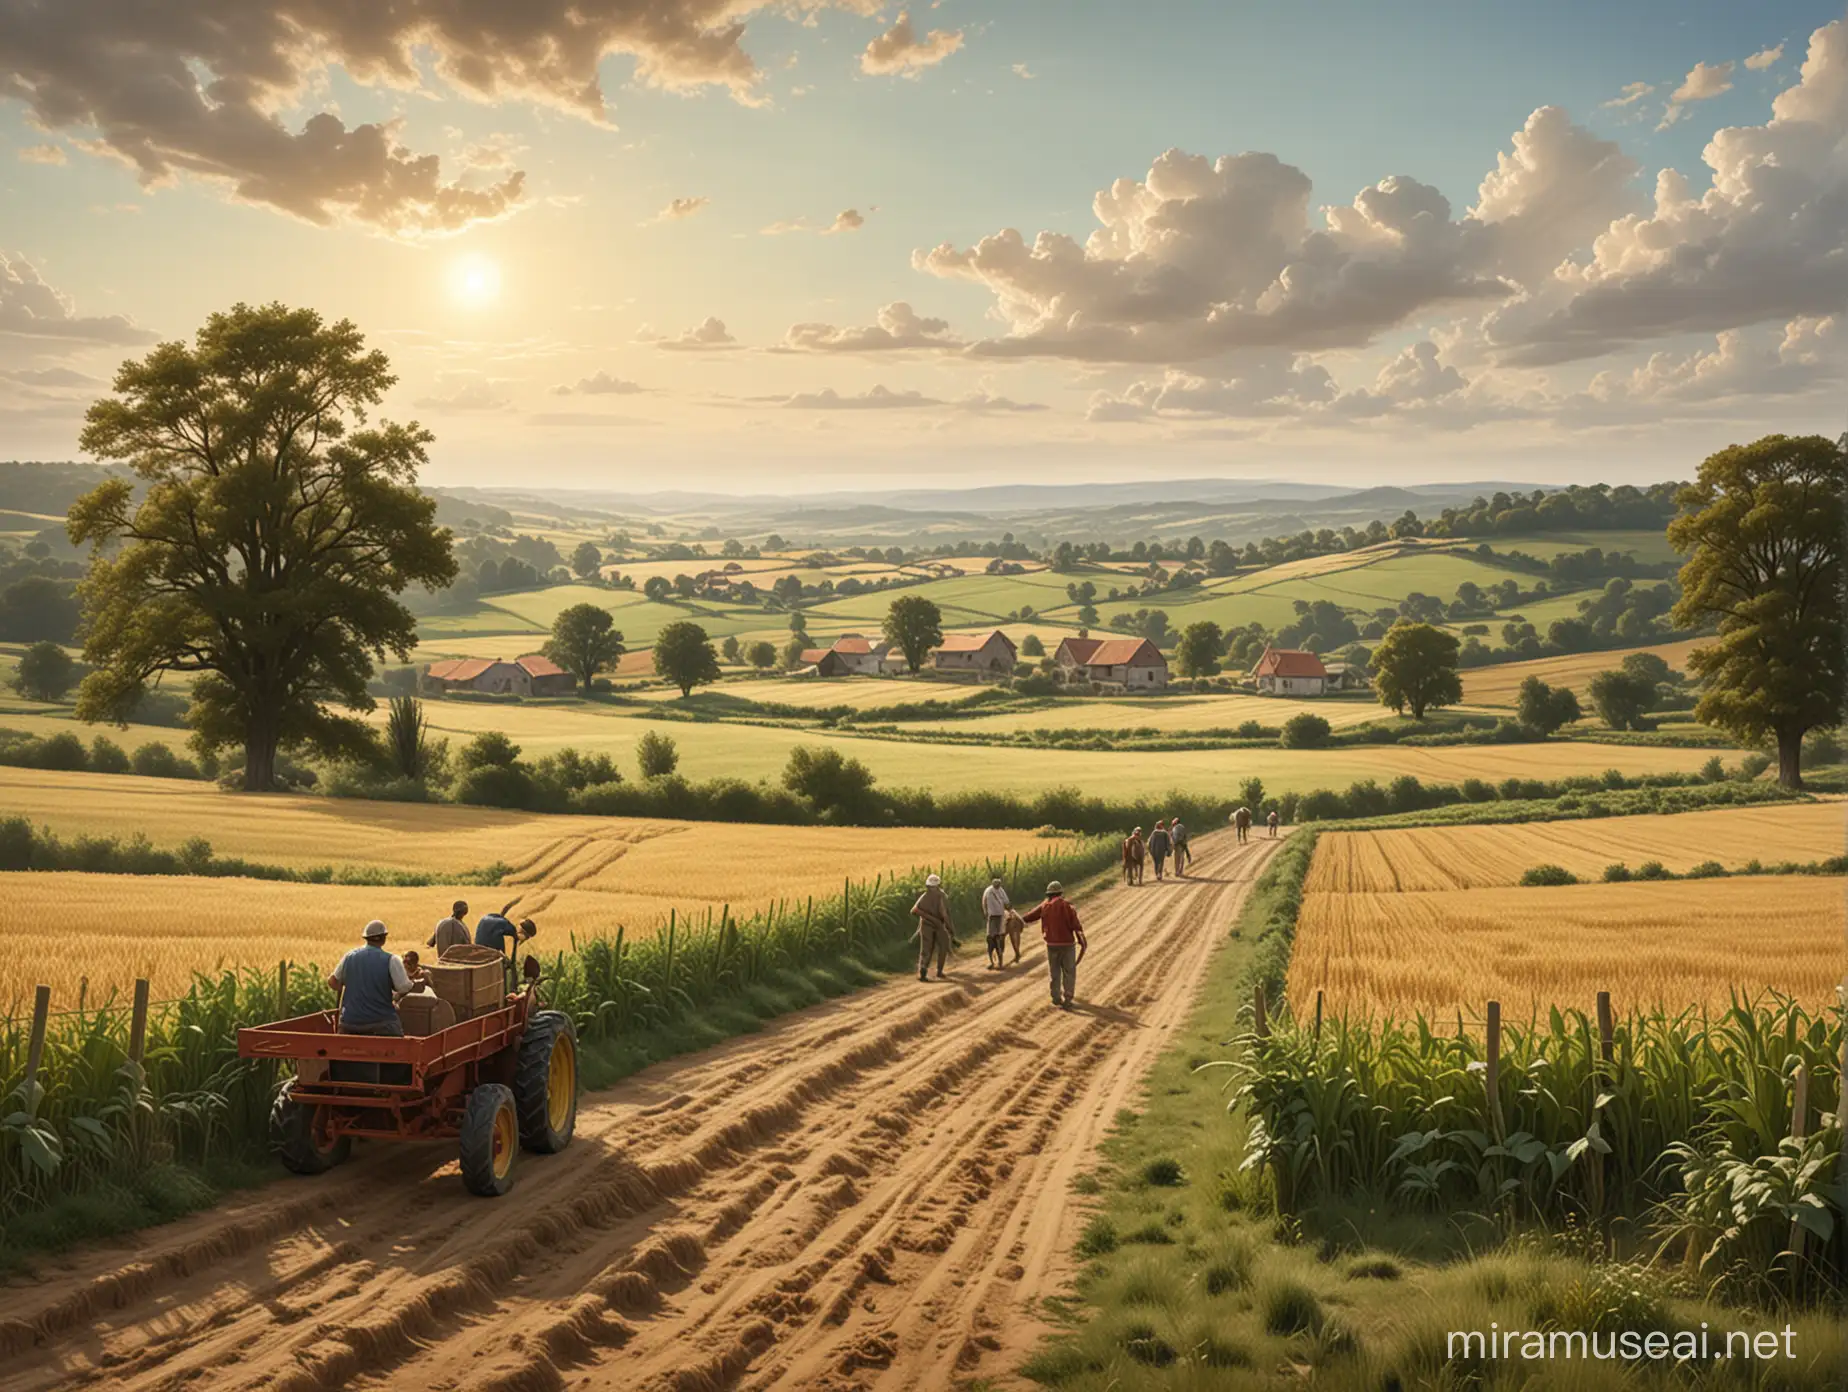 Tranquil Countryside Harvest Scene with Farmers Working in Fields